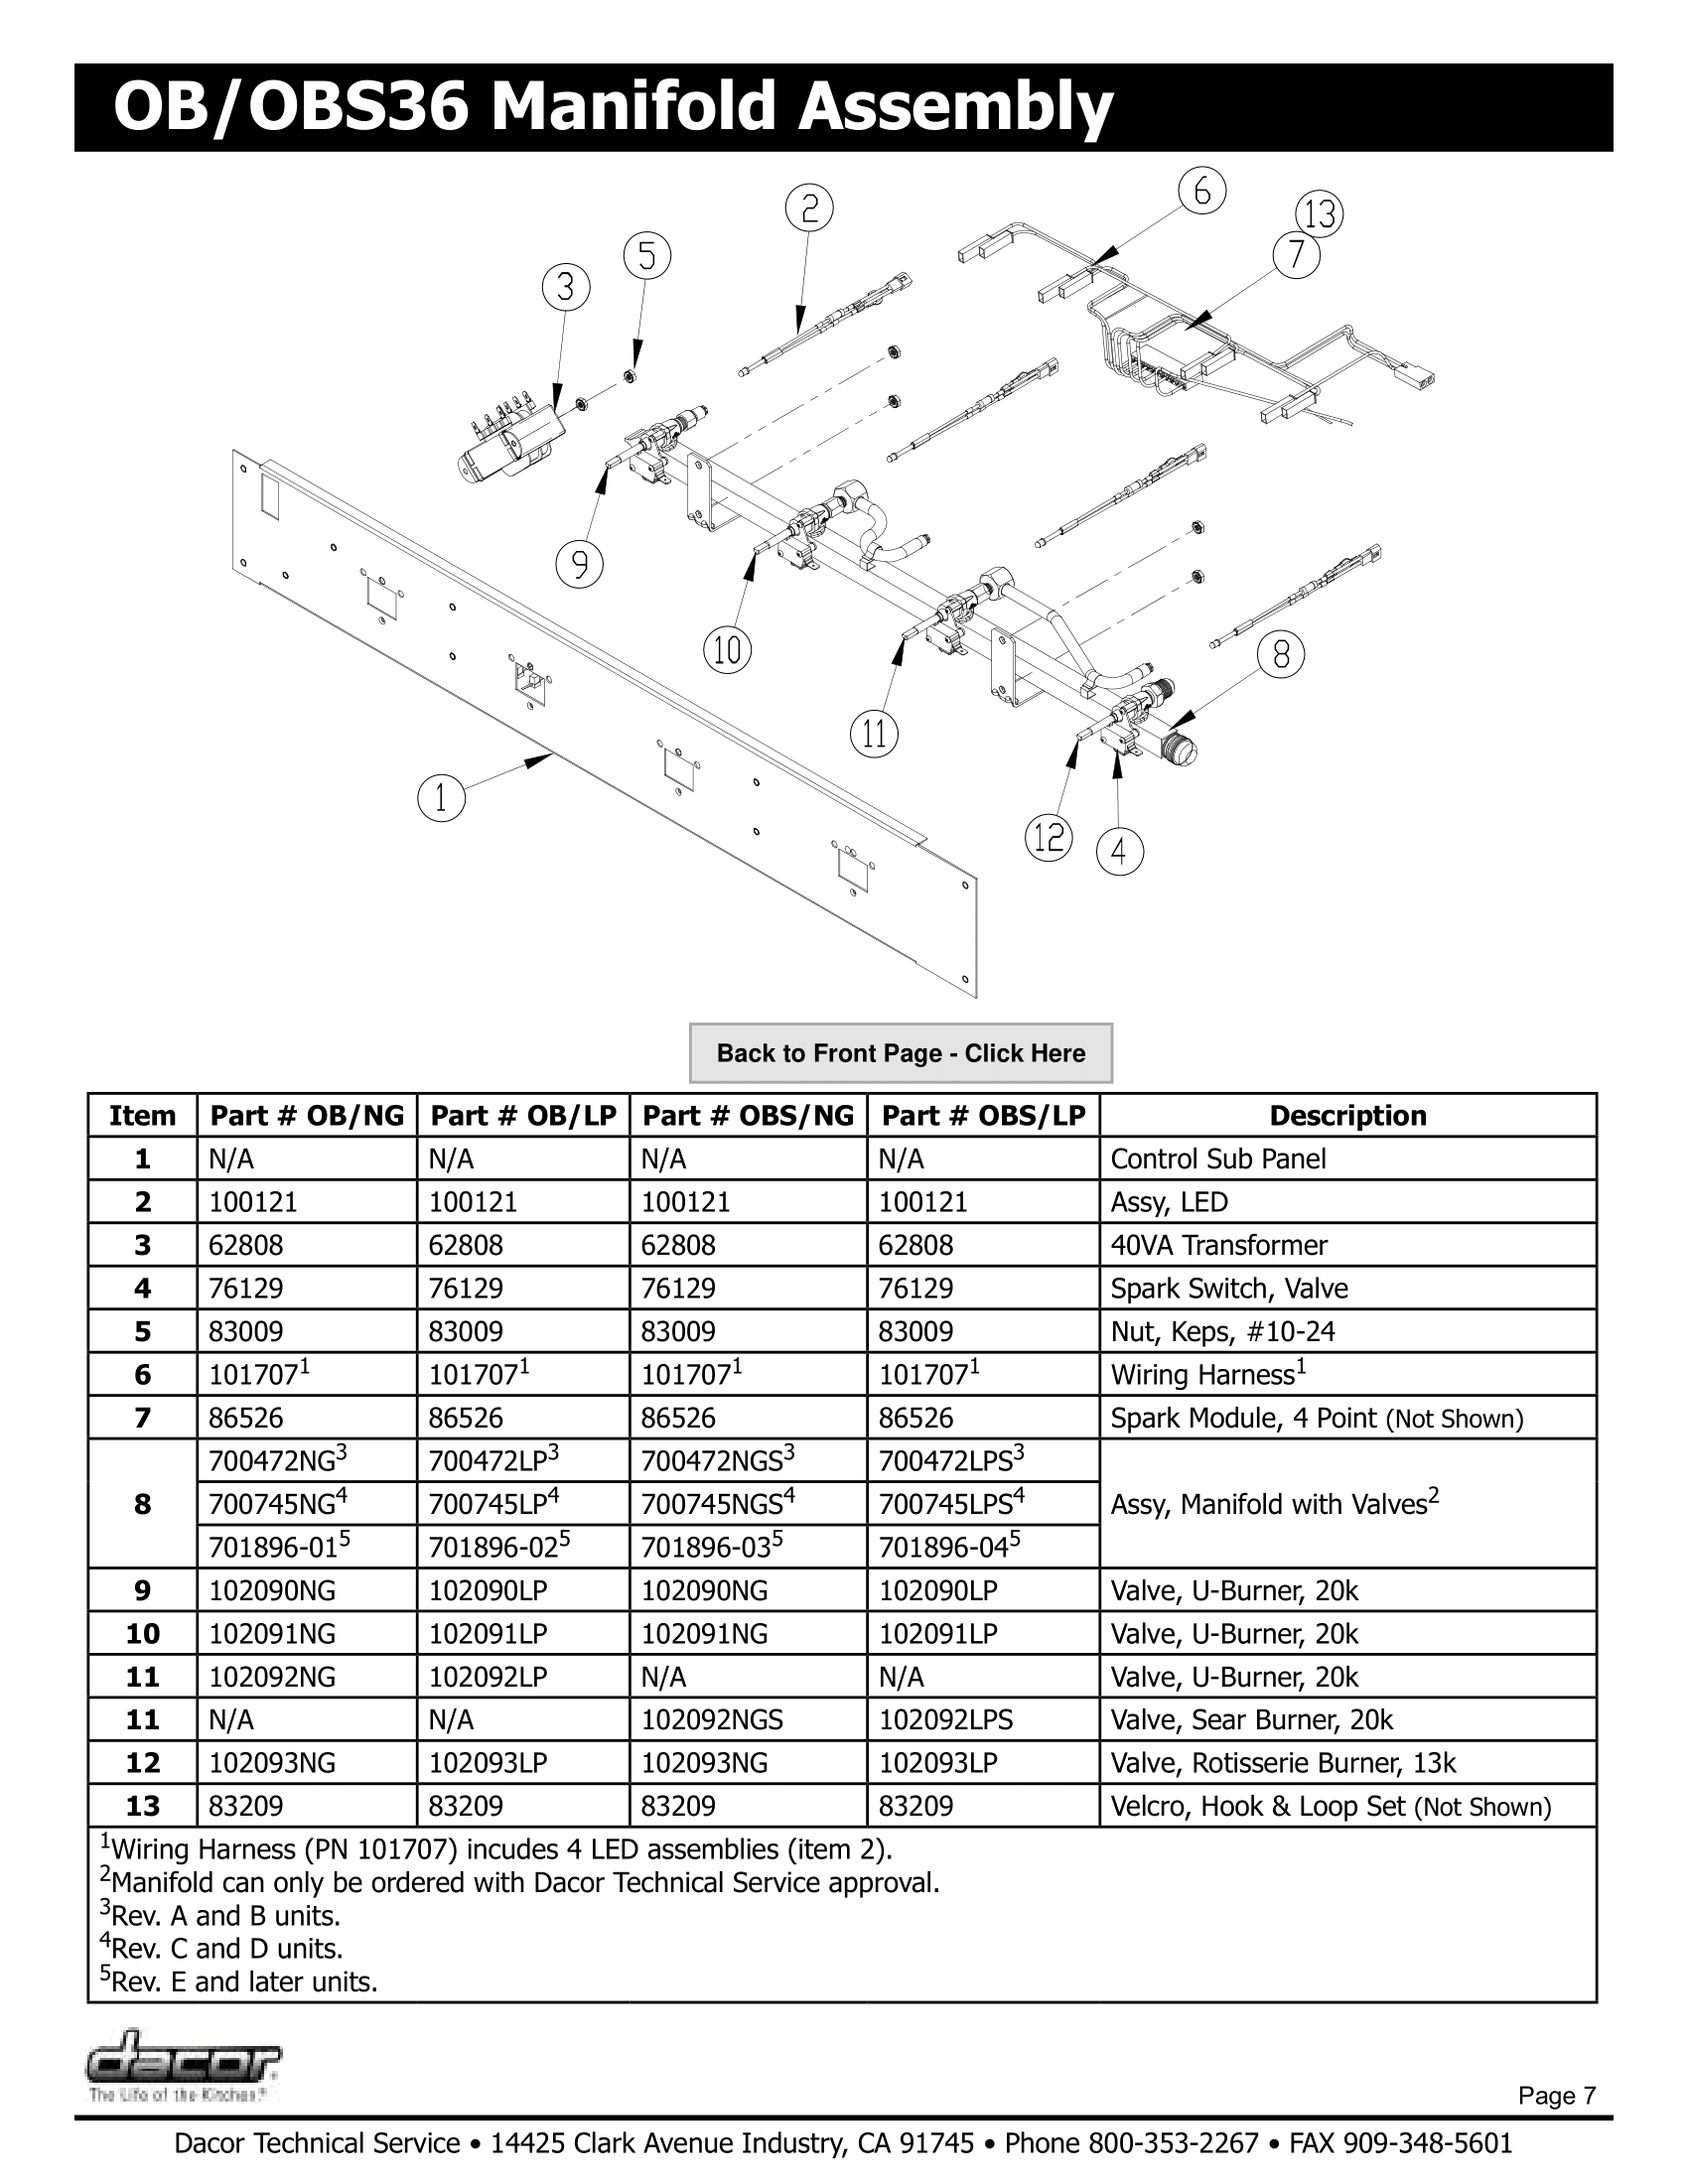 Dacor OB36 Manifold Assembly Schematic